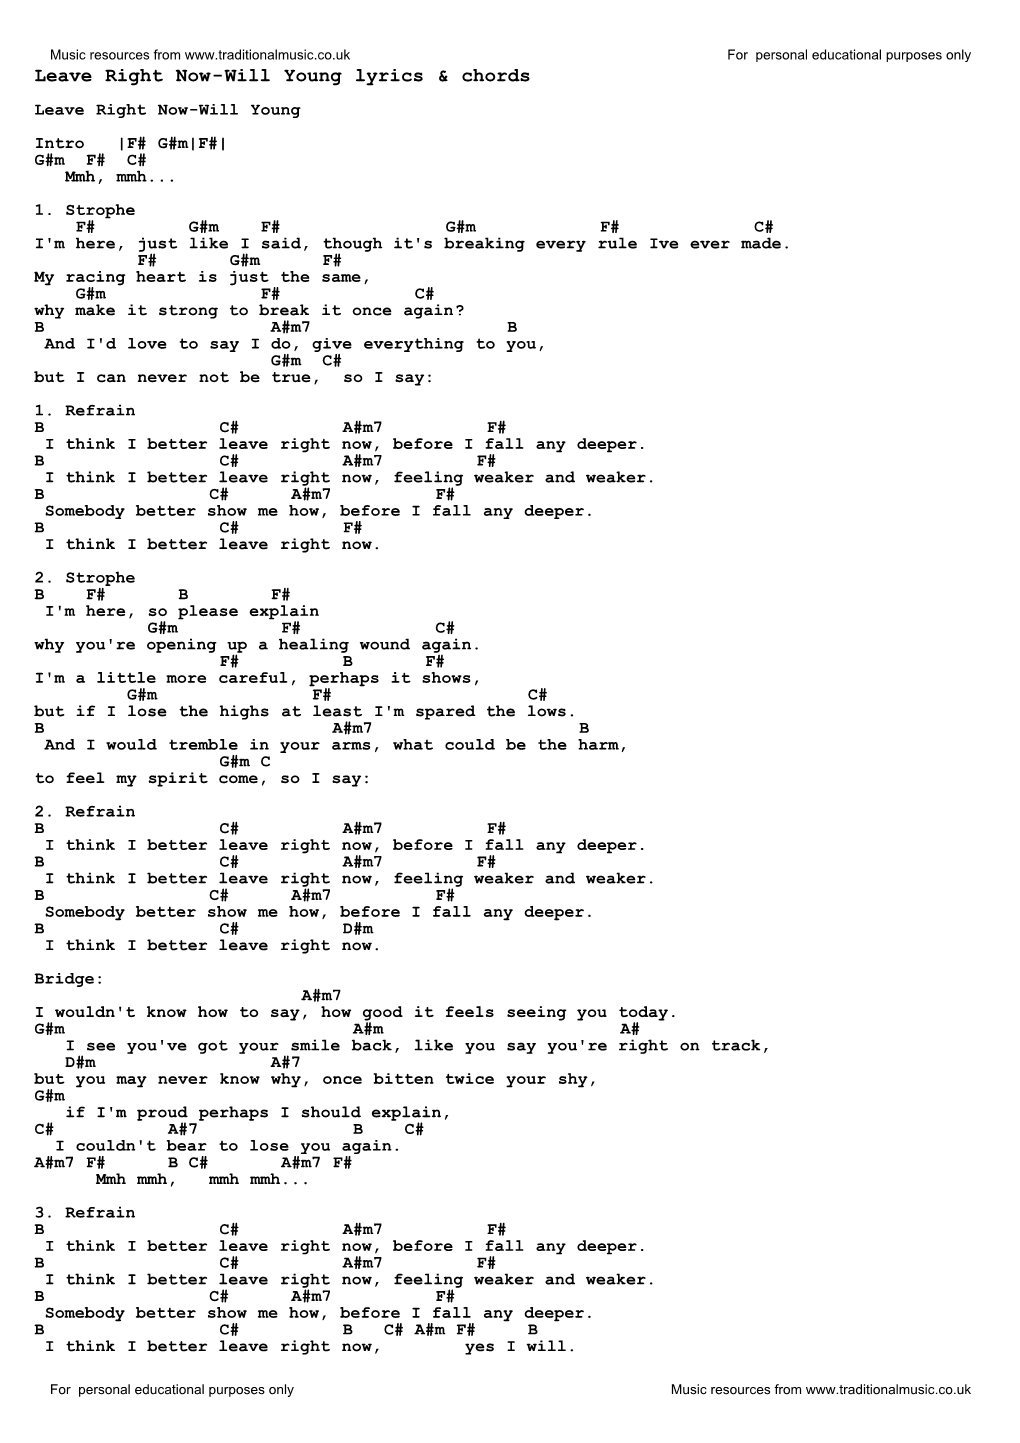 Leave Right Now-Will Young Lyrics & Chords